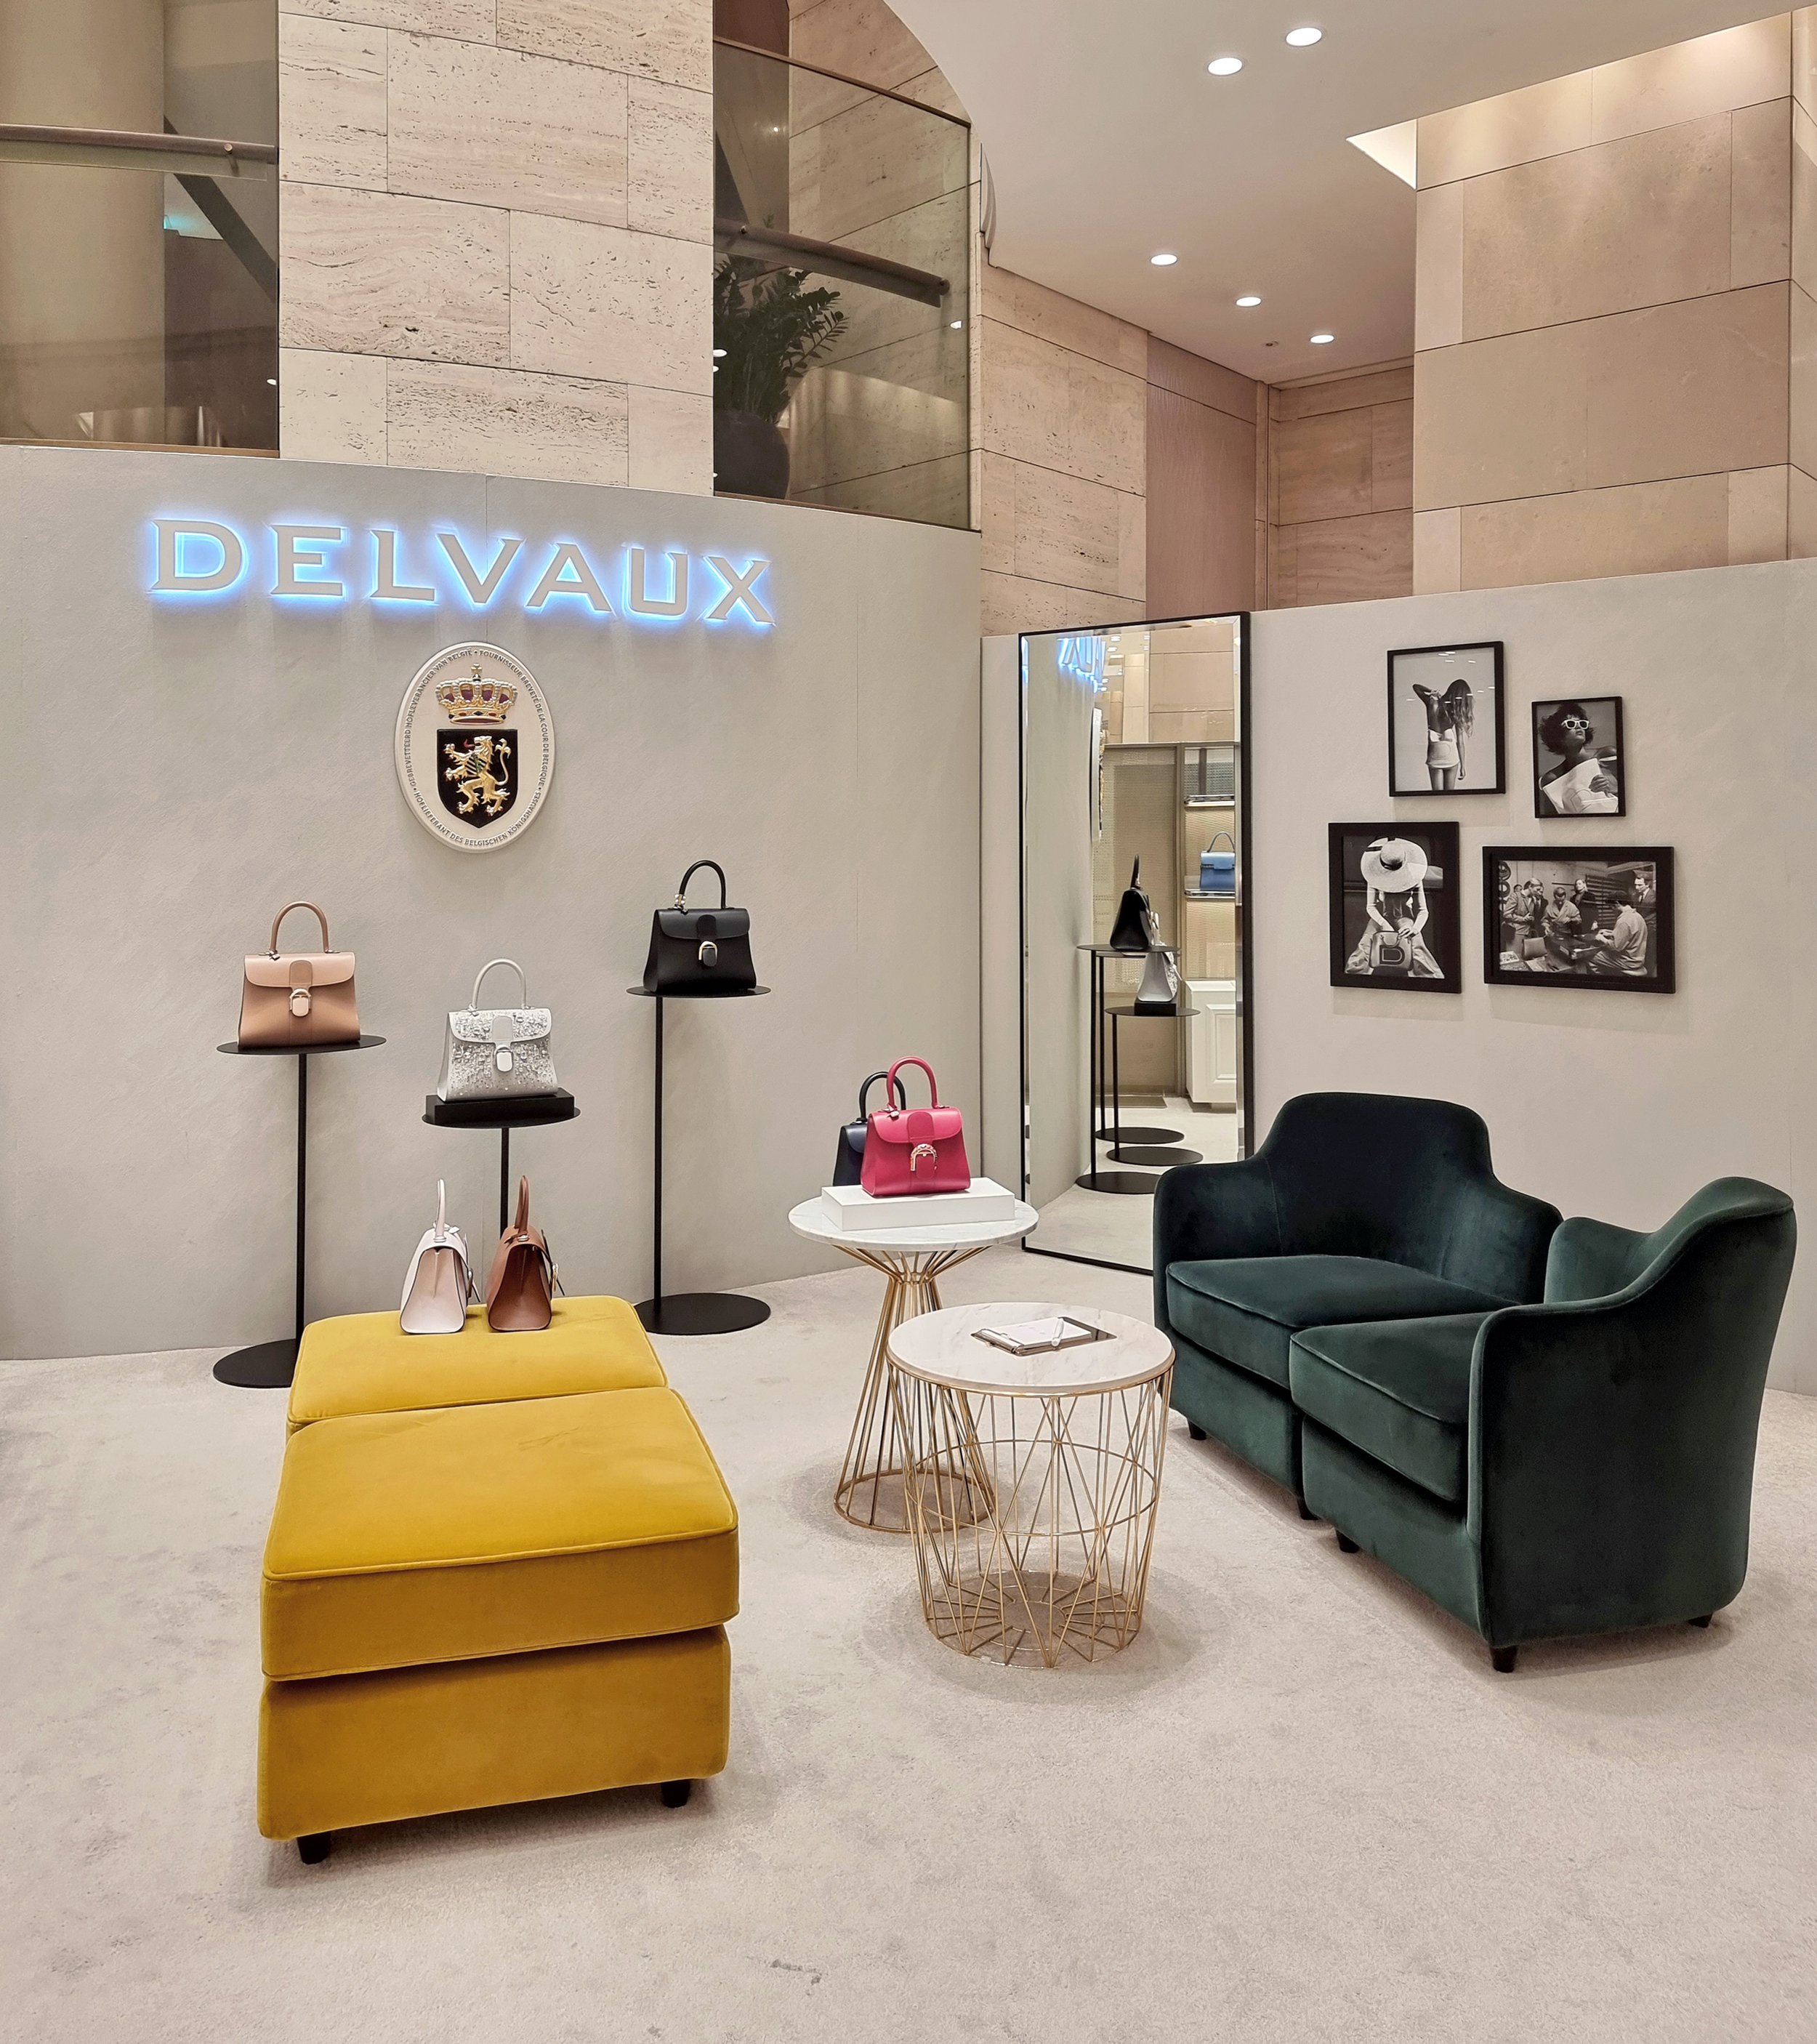   delvaux store in ssg main  